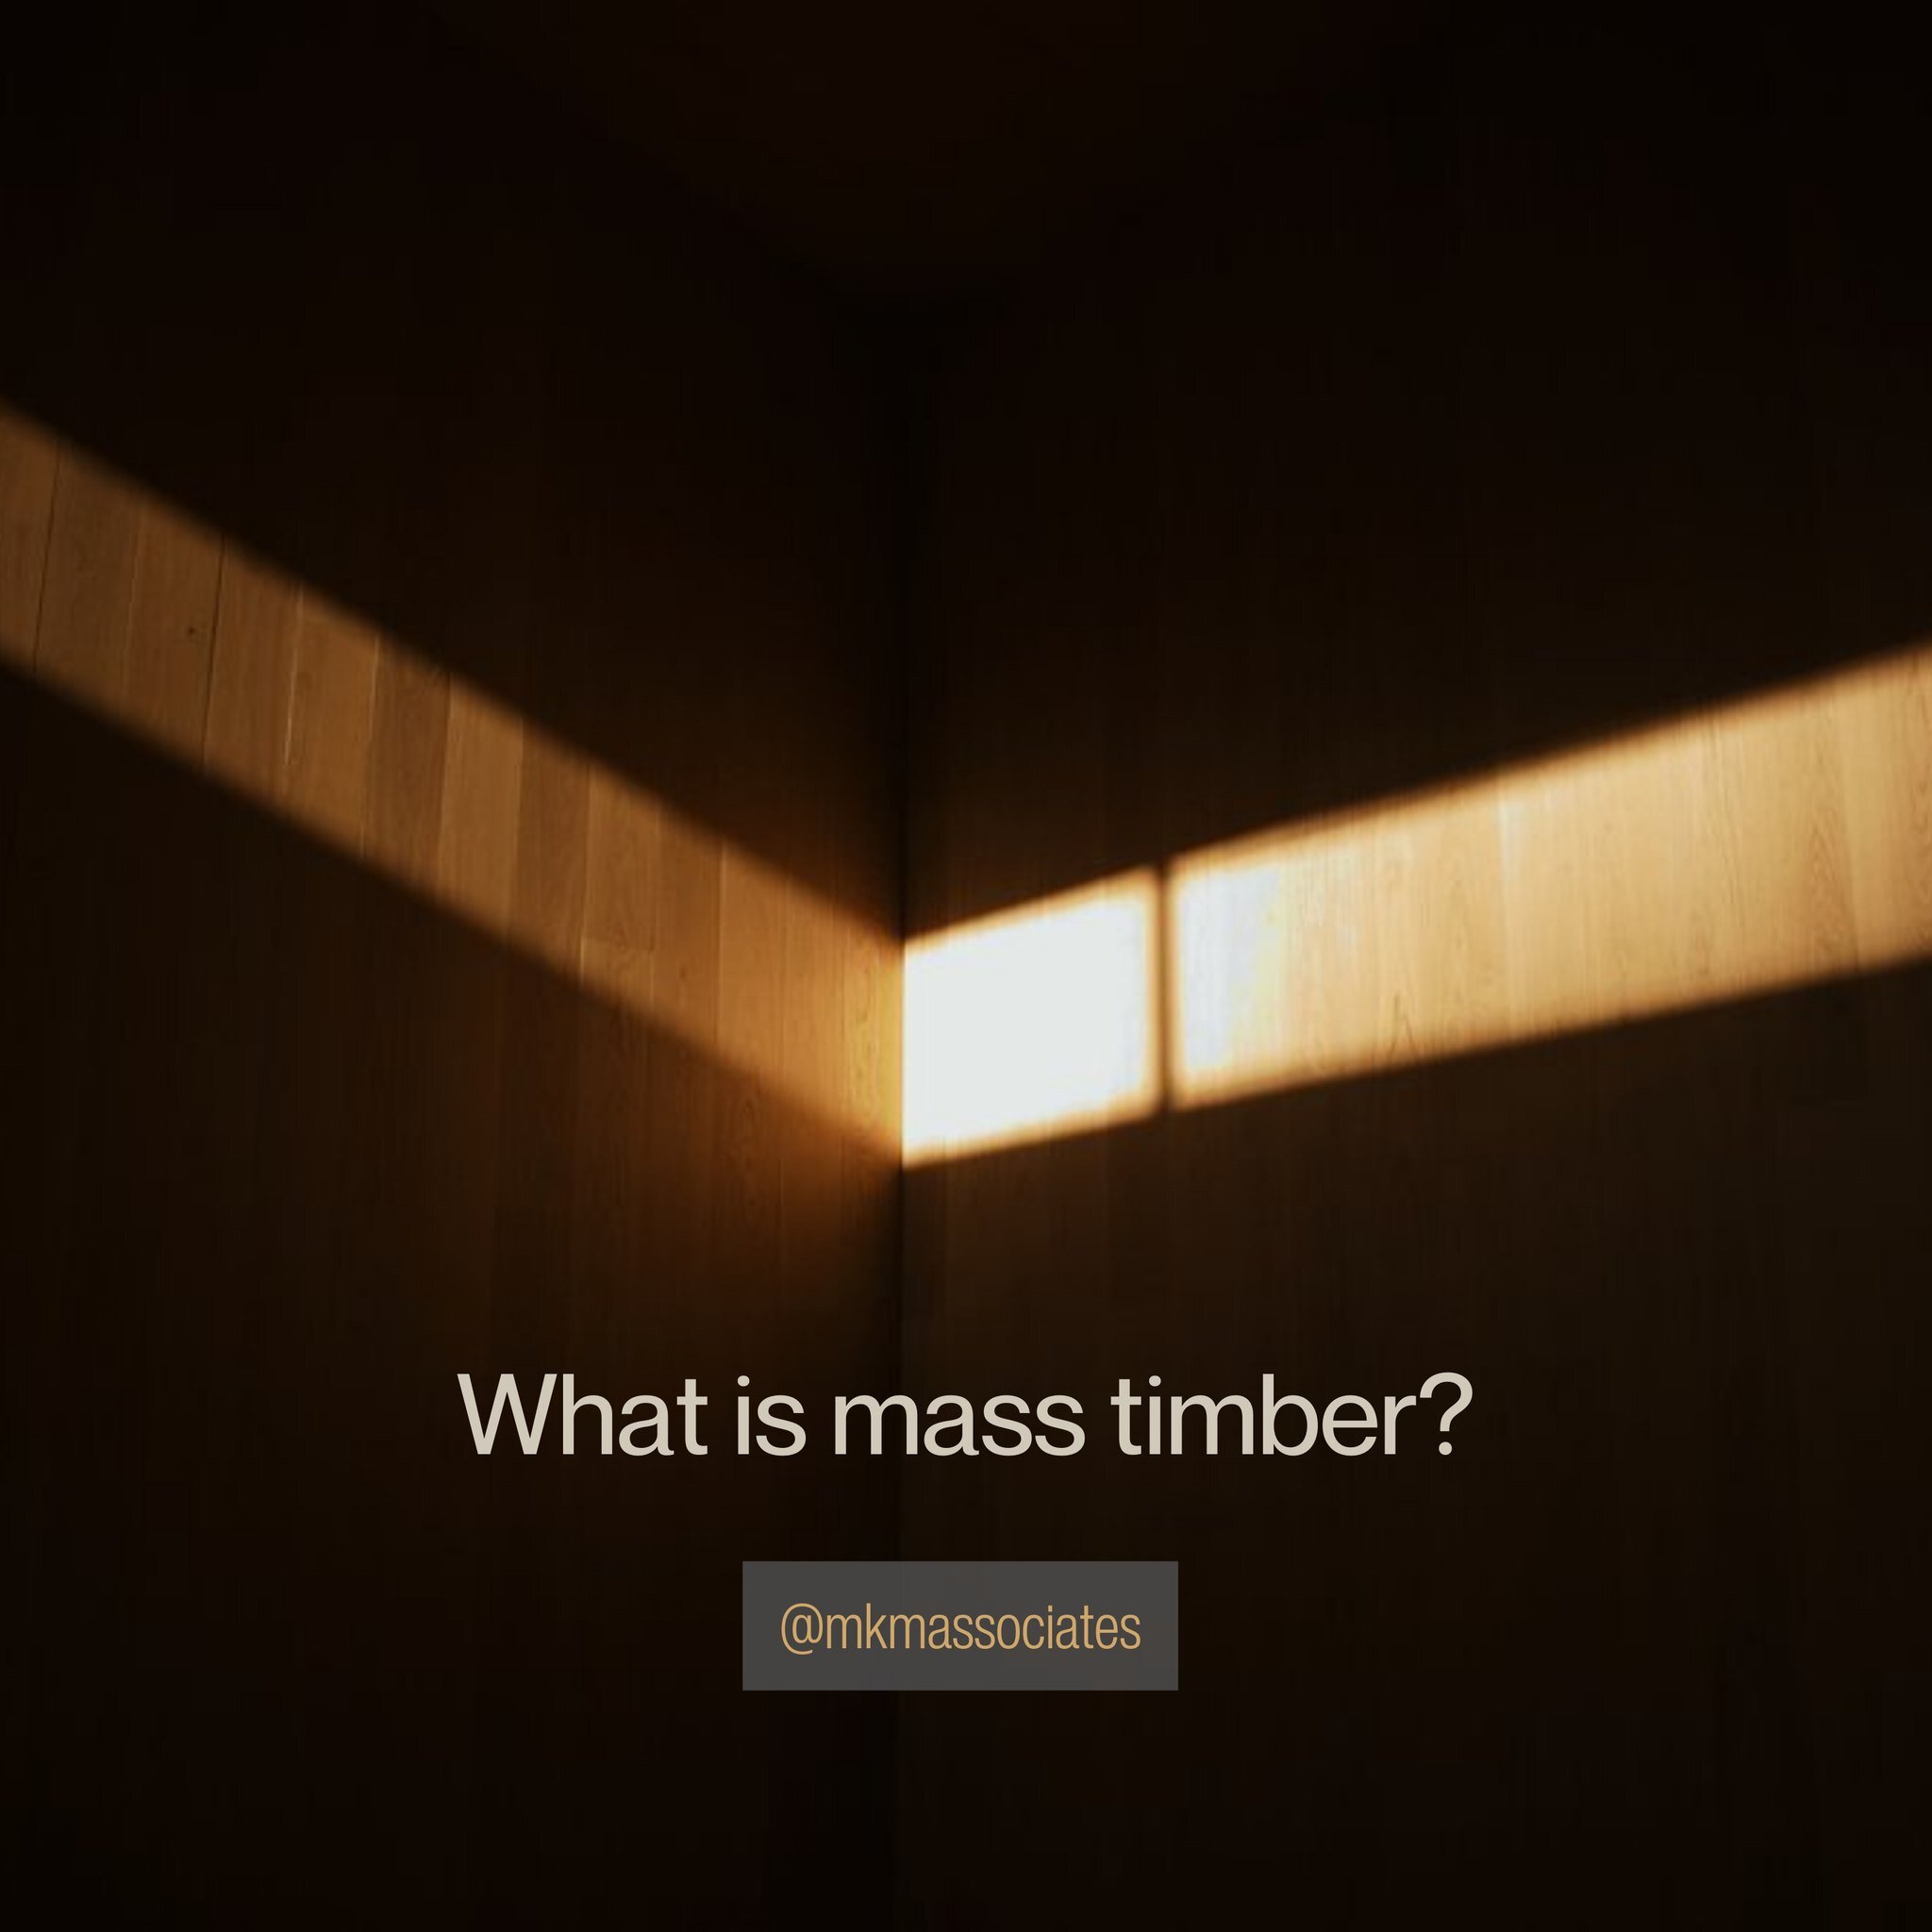 Mass timber is a type of engineered wood product that is gaining popularity in structural engineering and construction. 

It involves using large, solid wood panels for constructing buildings and other structures. Unlike traditional timber framing, w